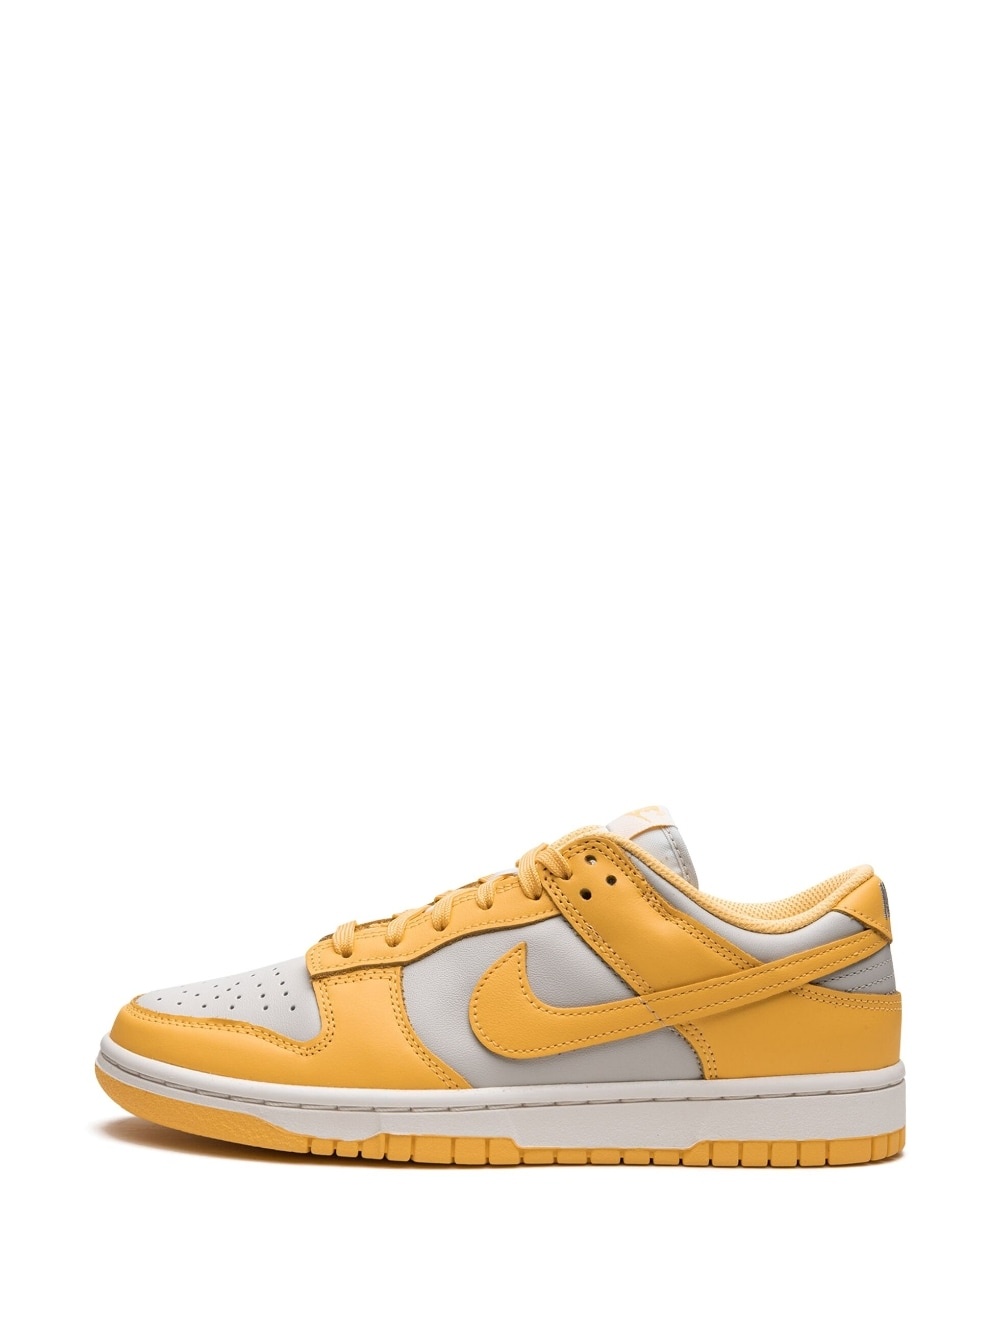 Dunk Low "Citron Pulse" sneakers - 5